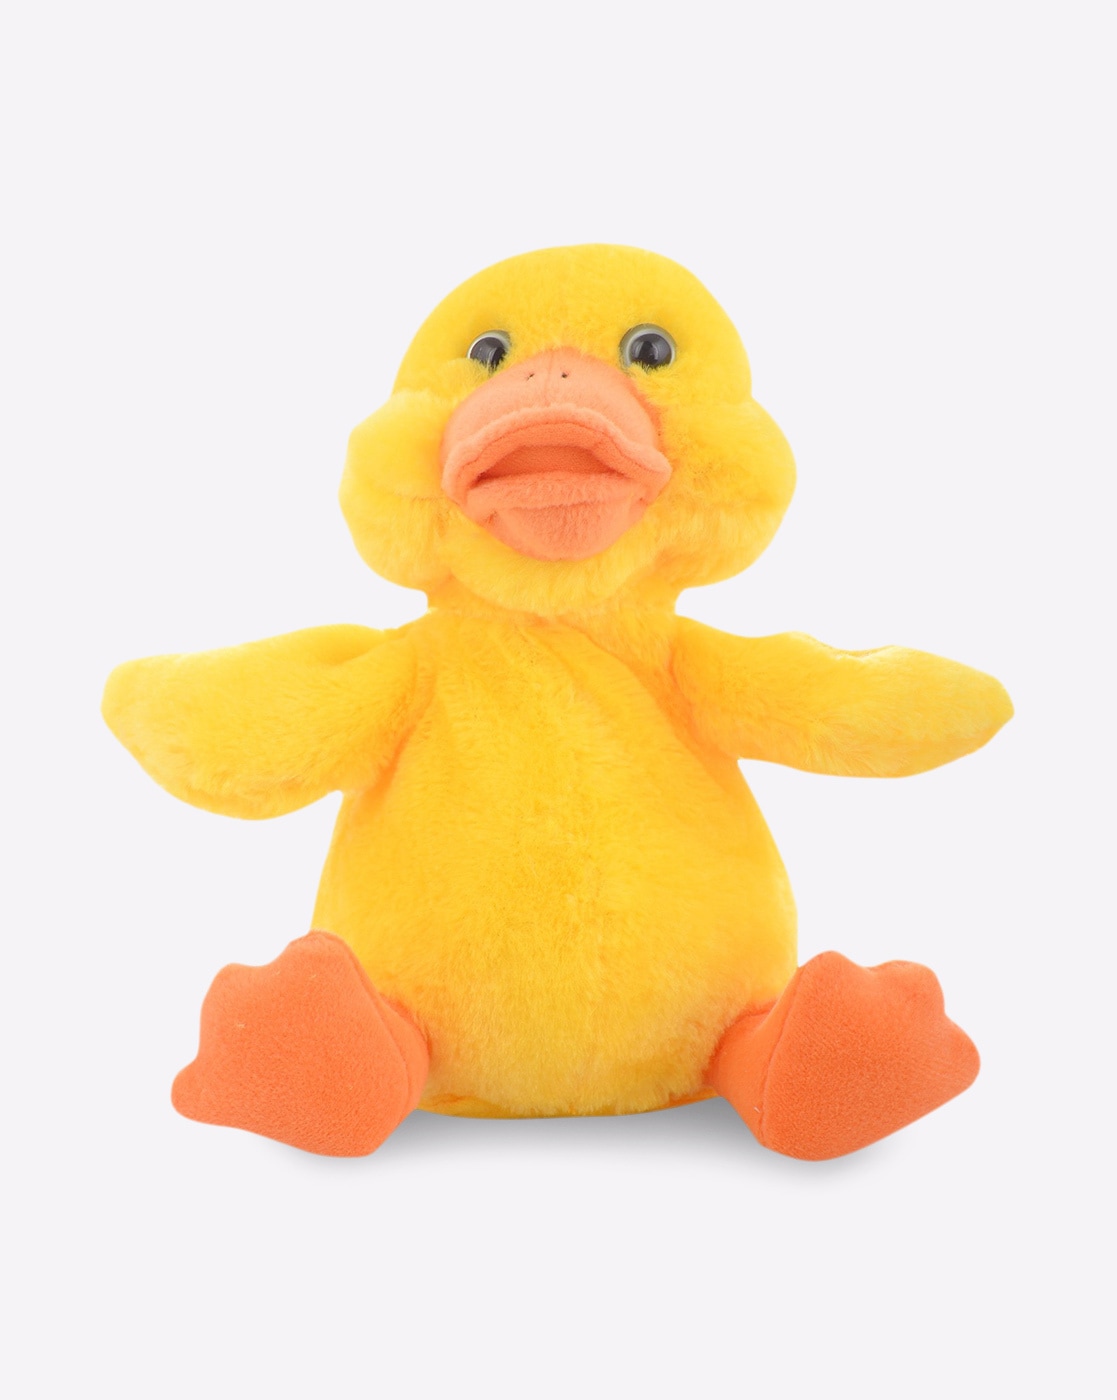 donald duck soft toy online